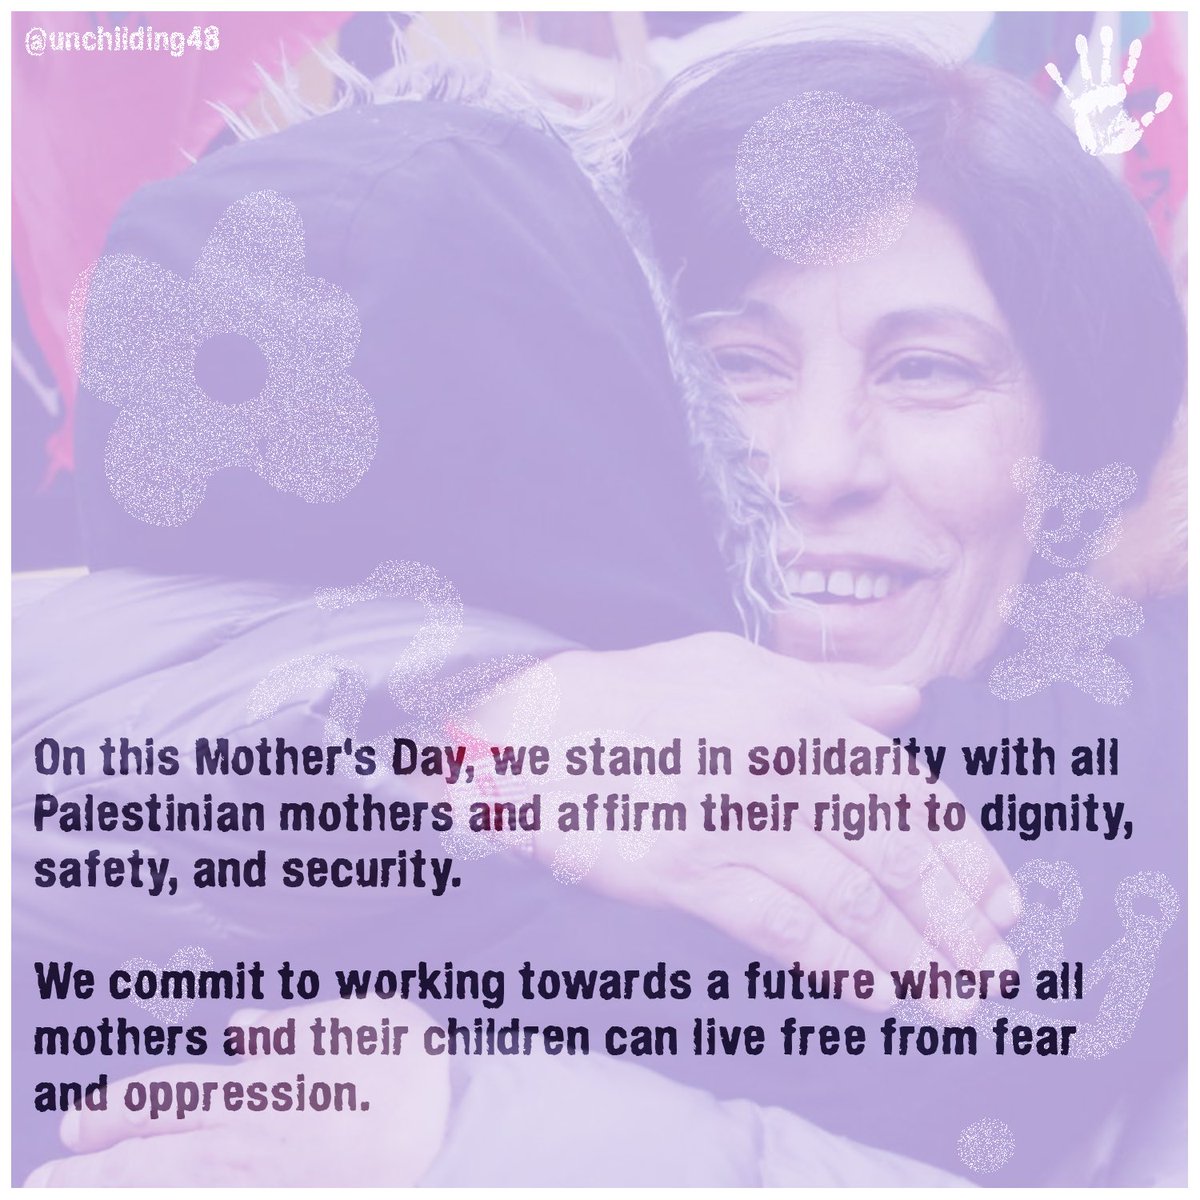 On this mothers day, more power to Palestinian mothers. #unparenting #unchilding